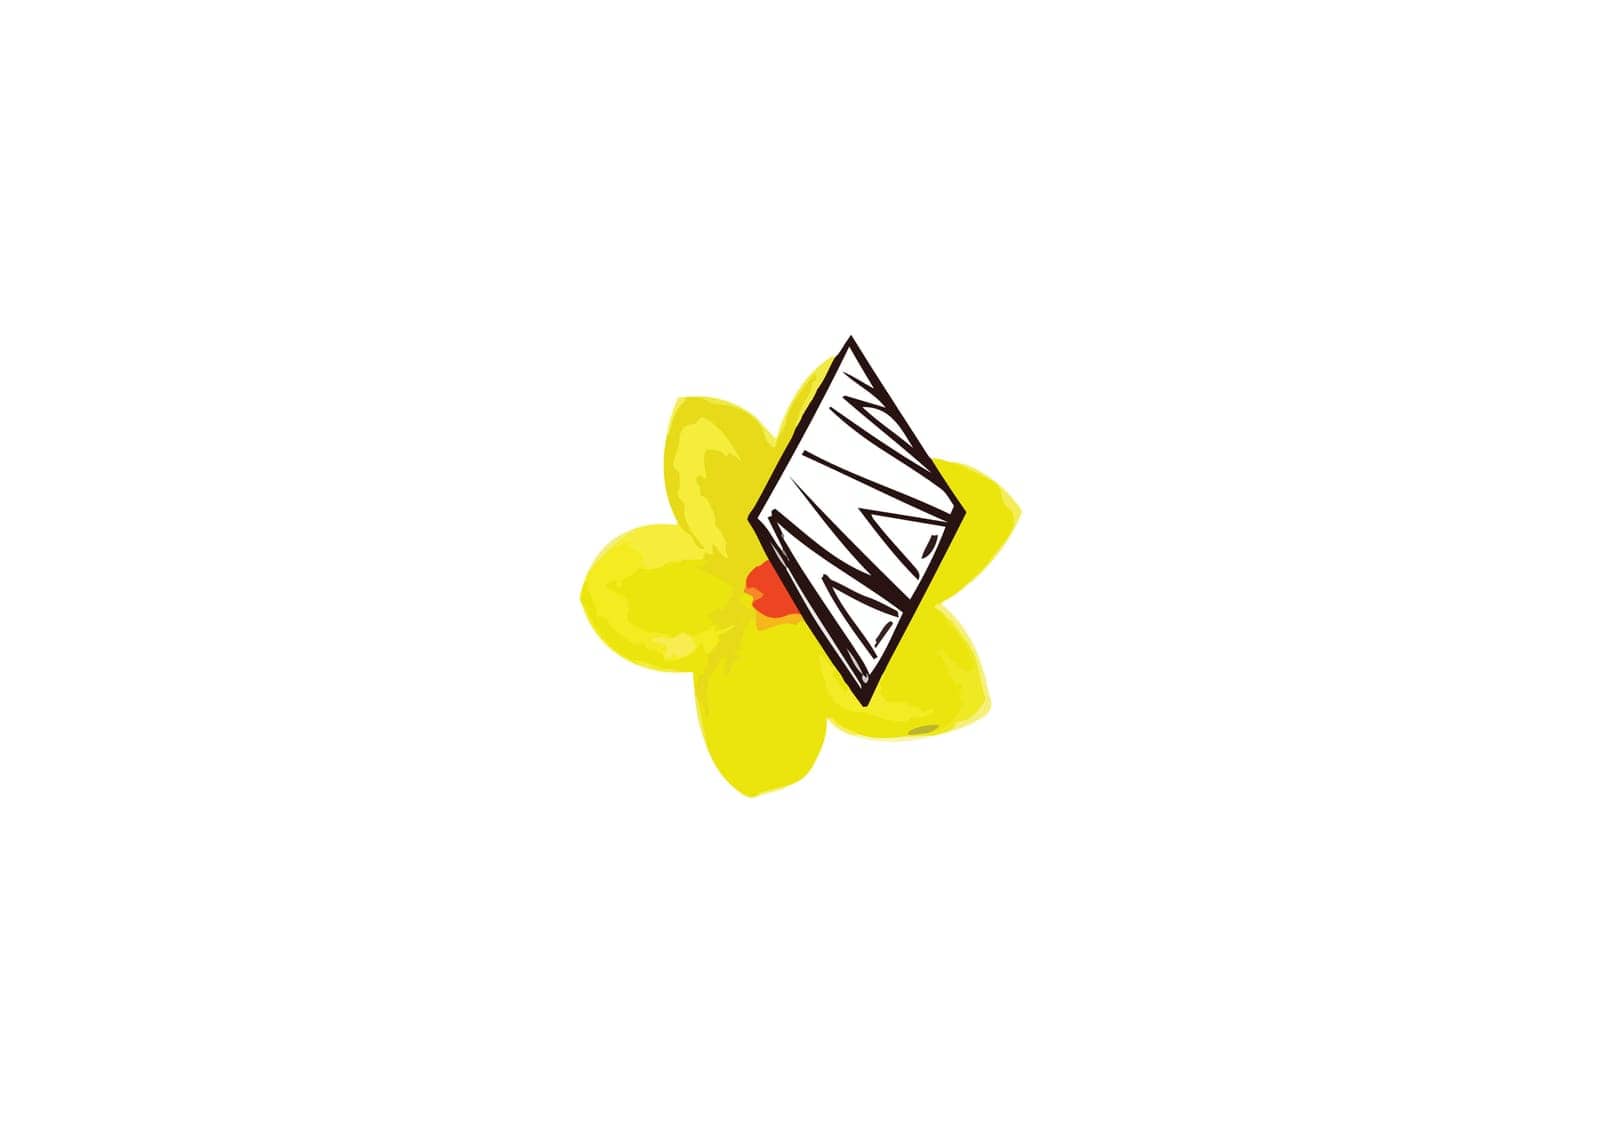 symbol,rhombus,shape,business,concept,icon,sign,yellow,chamomile,flower,web,design,geometric,monochrome,logo,vector,illustration,black,and,white,colorful,element by ogqcorp